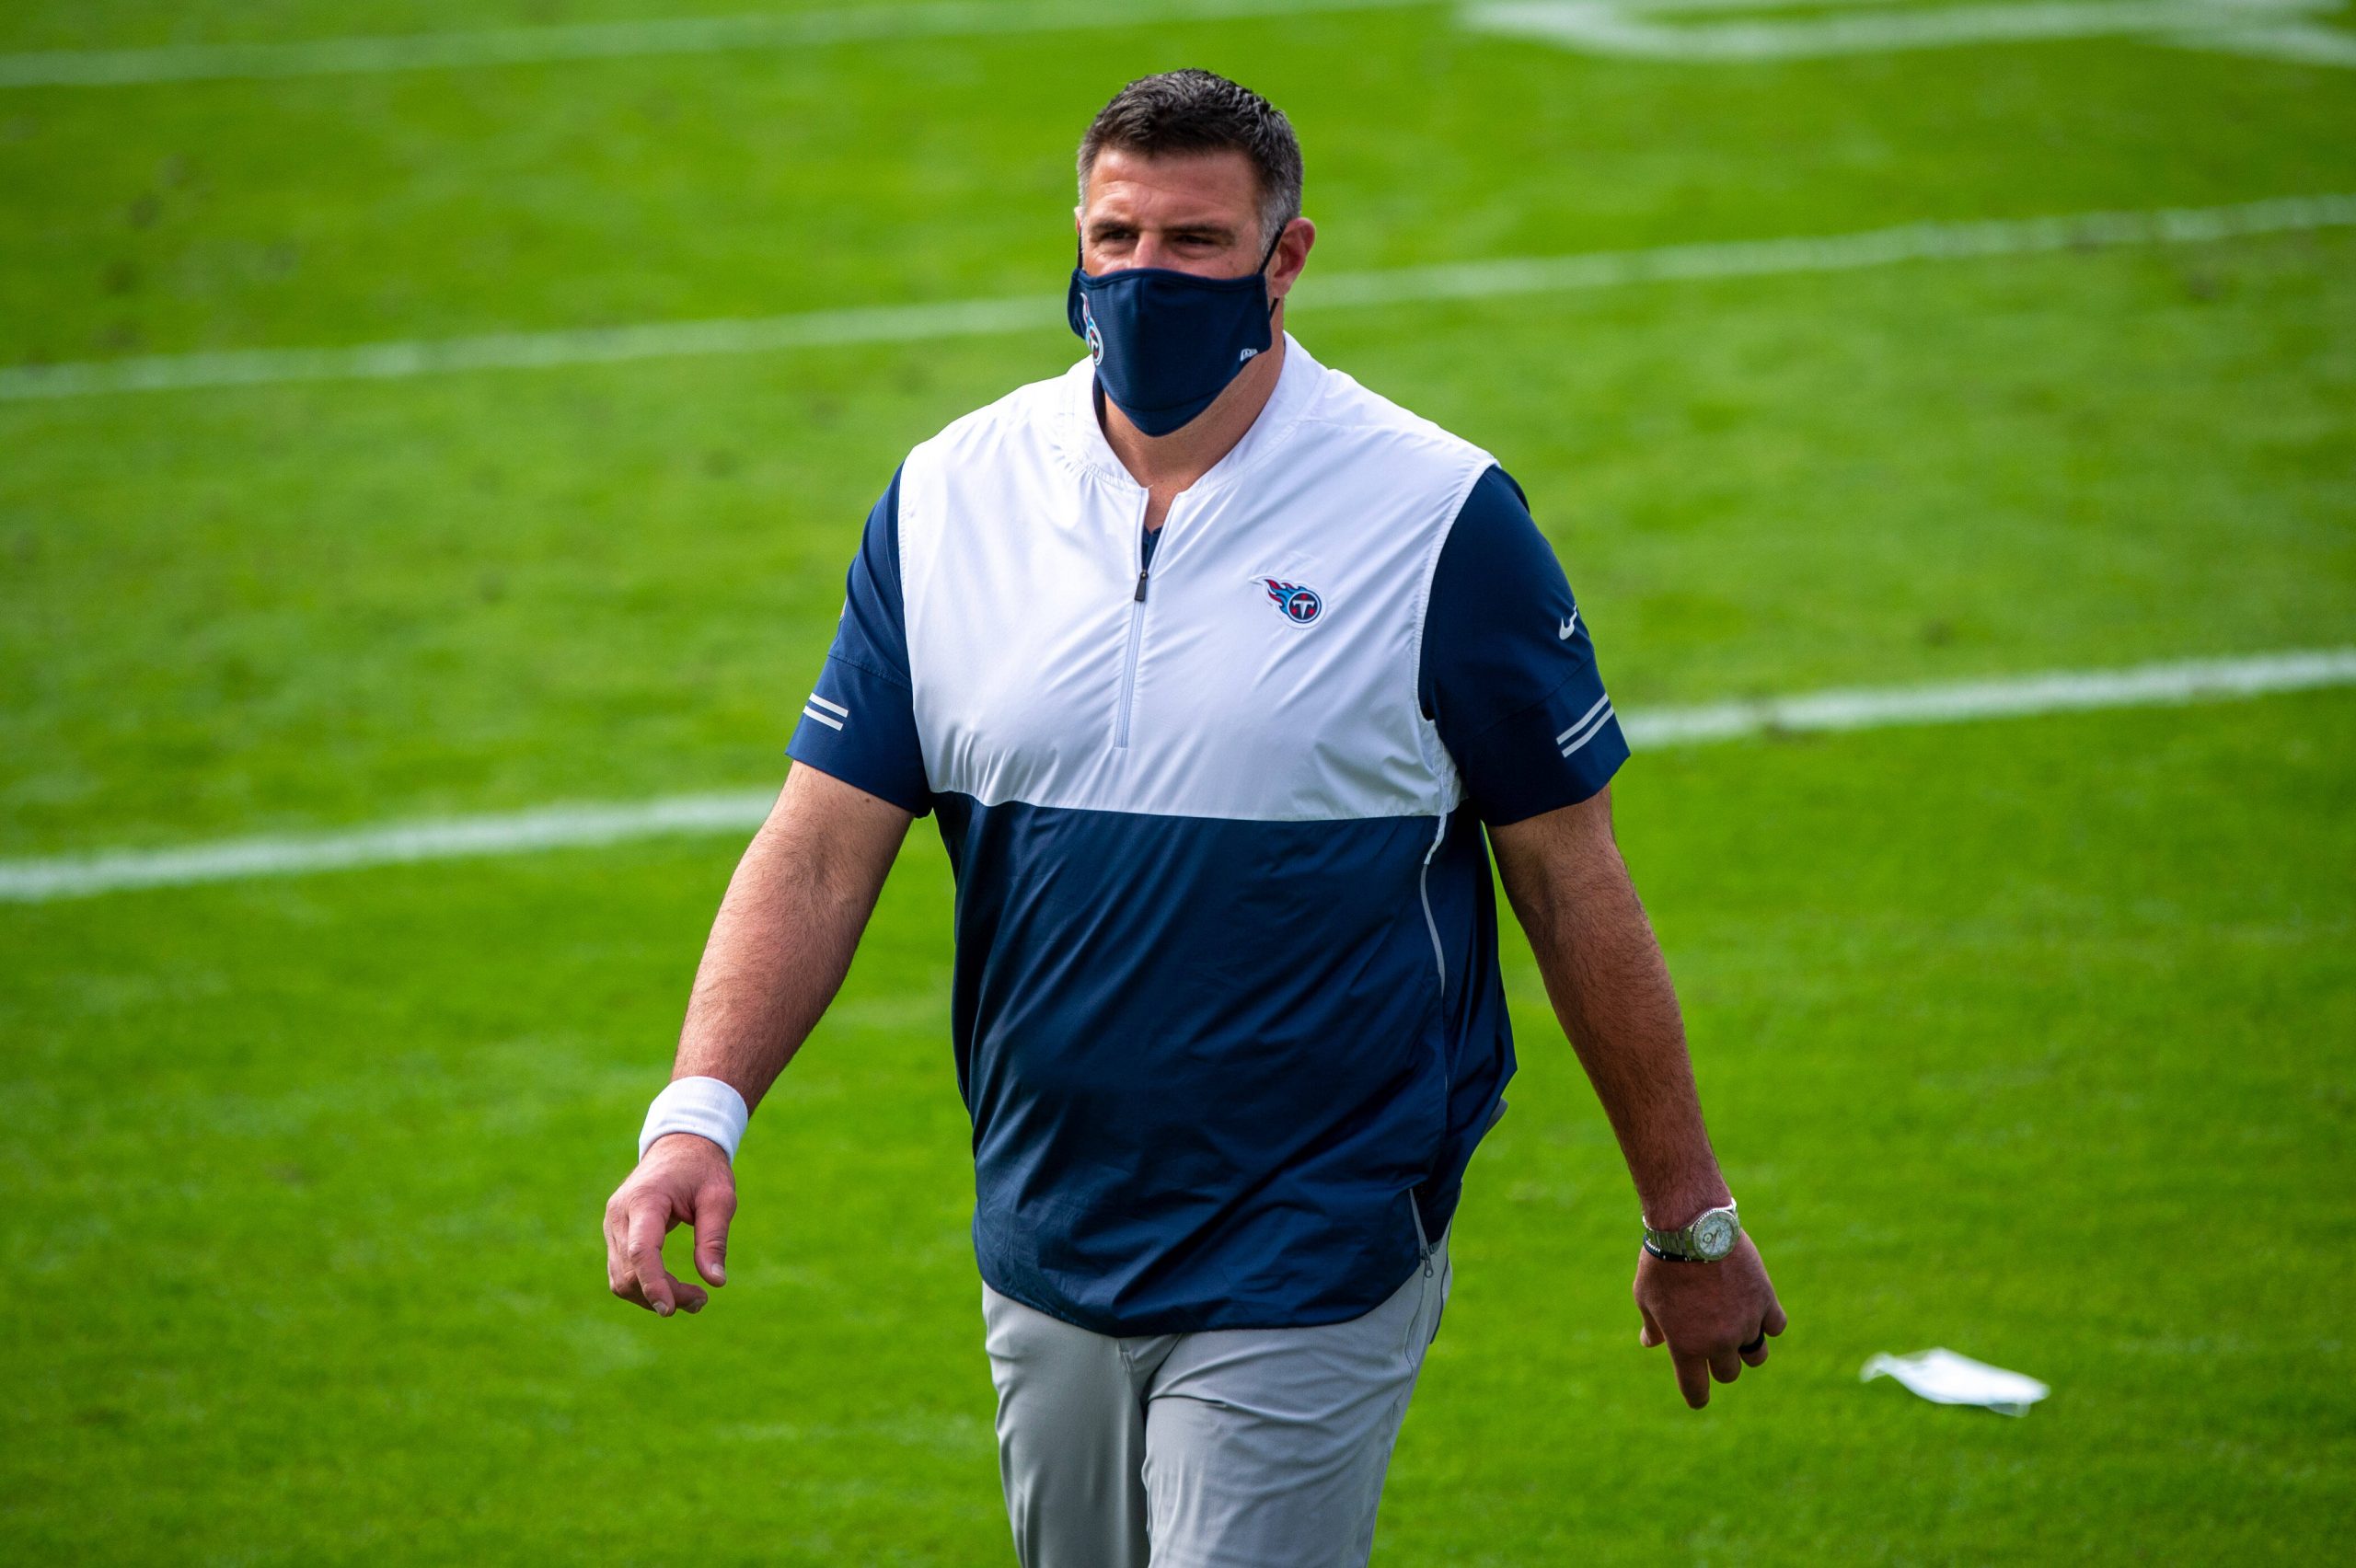 December 13, 2020, Jacksonville, Florida, USA: Tennessee Titans head coach MIKE VRABEL walks across the field during pre